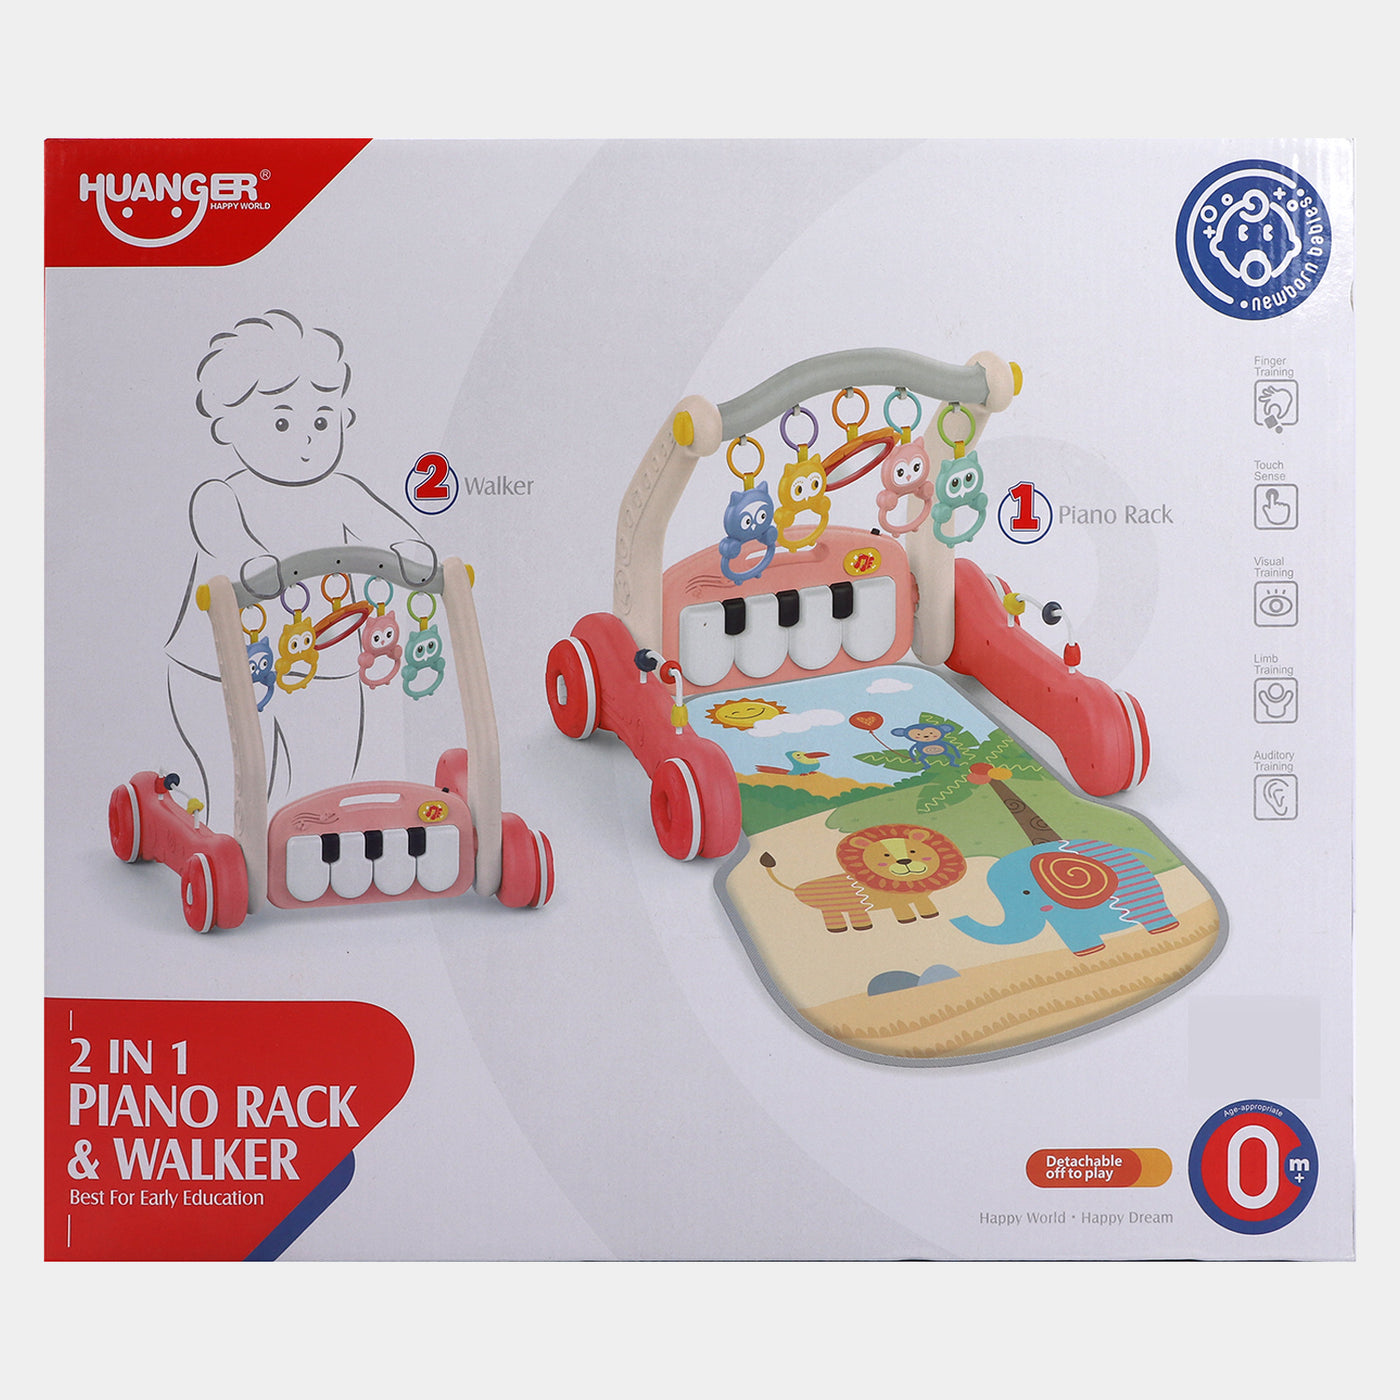 2 IN 1 Piano Rack & Walker With Light & Music